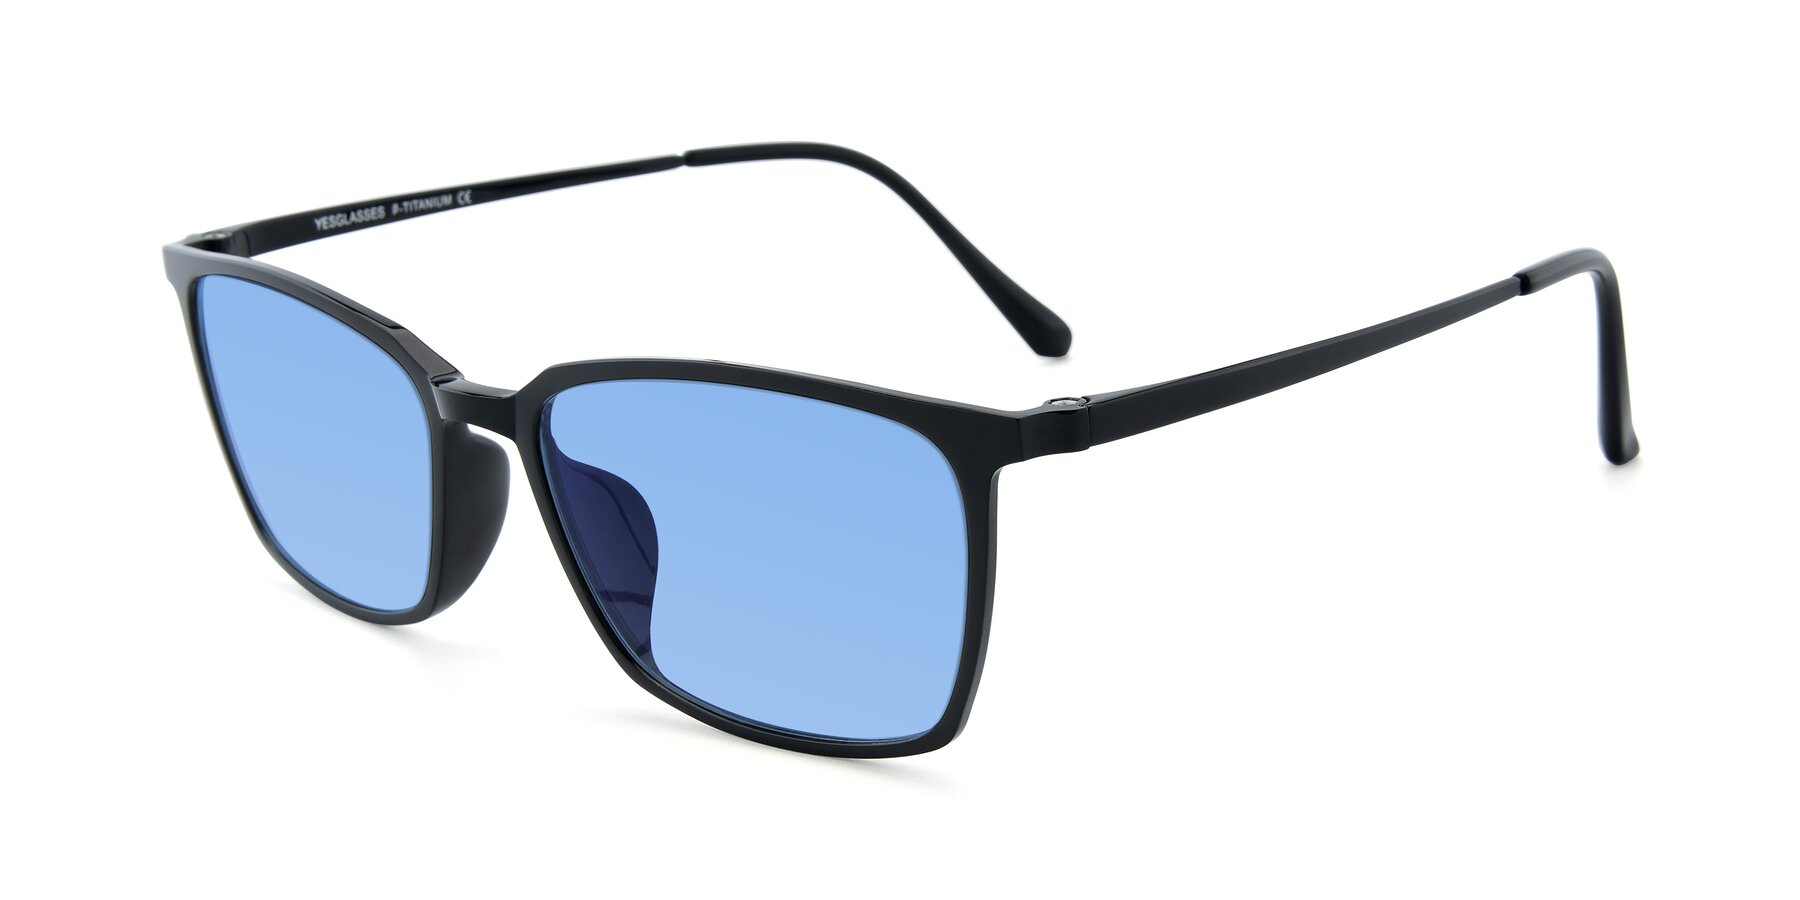 Angle of XC-5009 in Black with Medium Blue Tinted Lenses